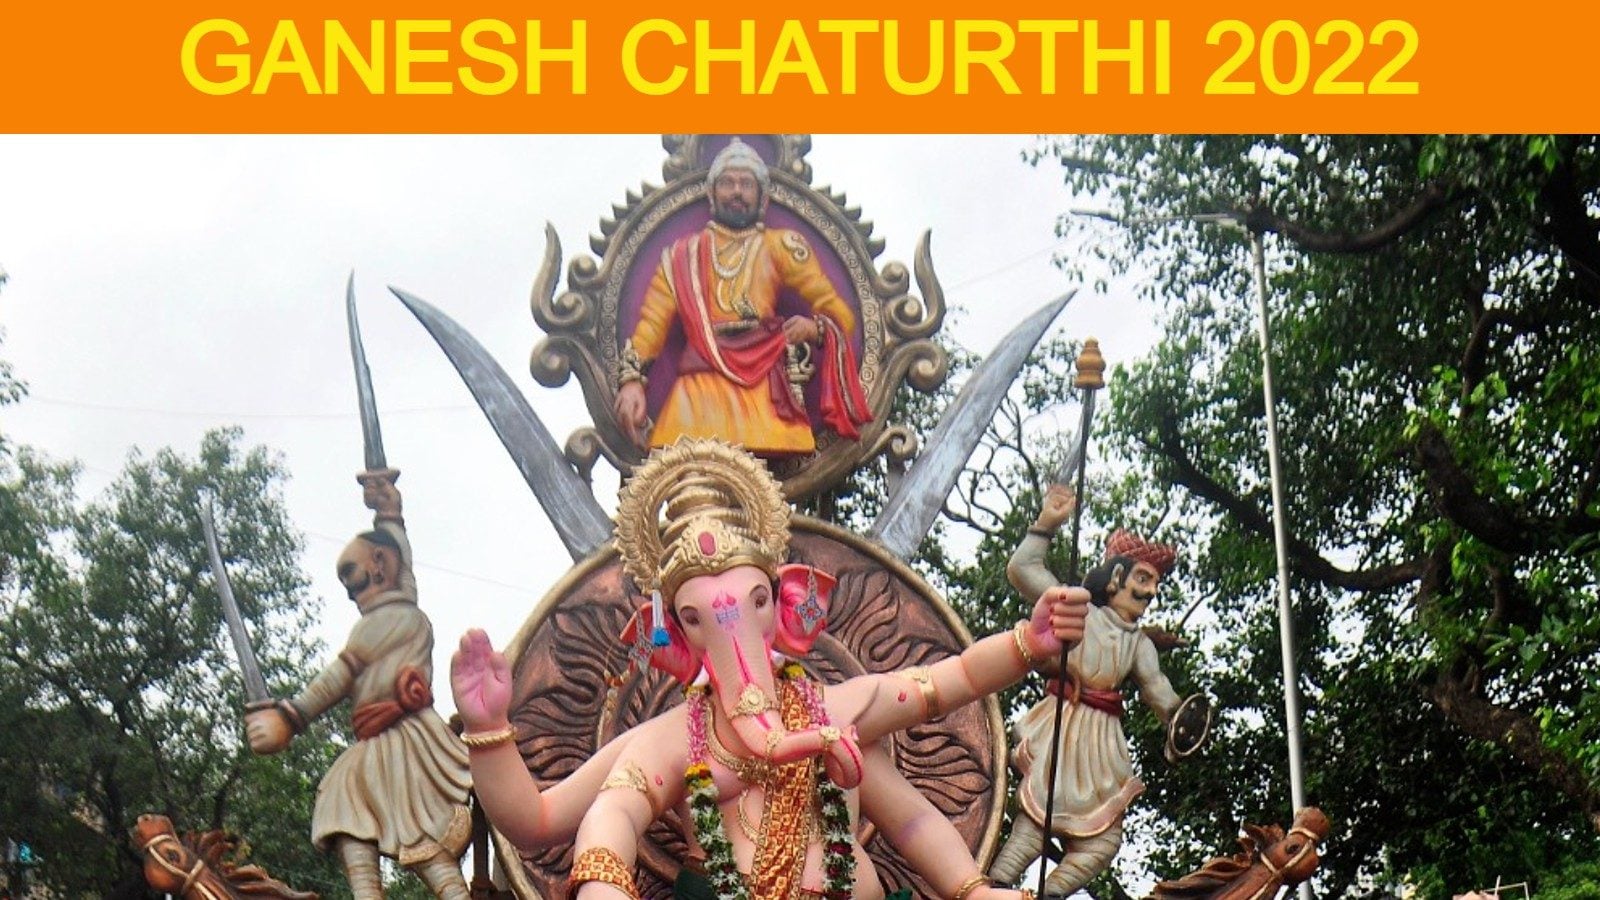 Ganesh Chaturthi 2022: Different Names of Lord Ganesha and Their Meanings That Will Surprise You